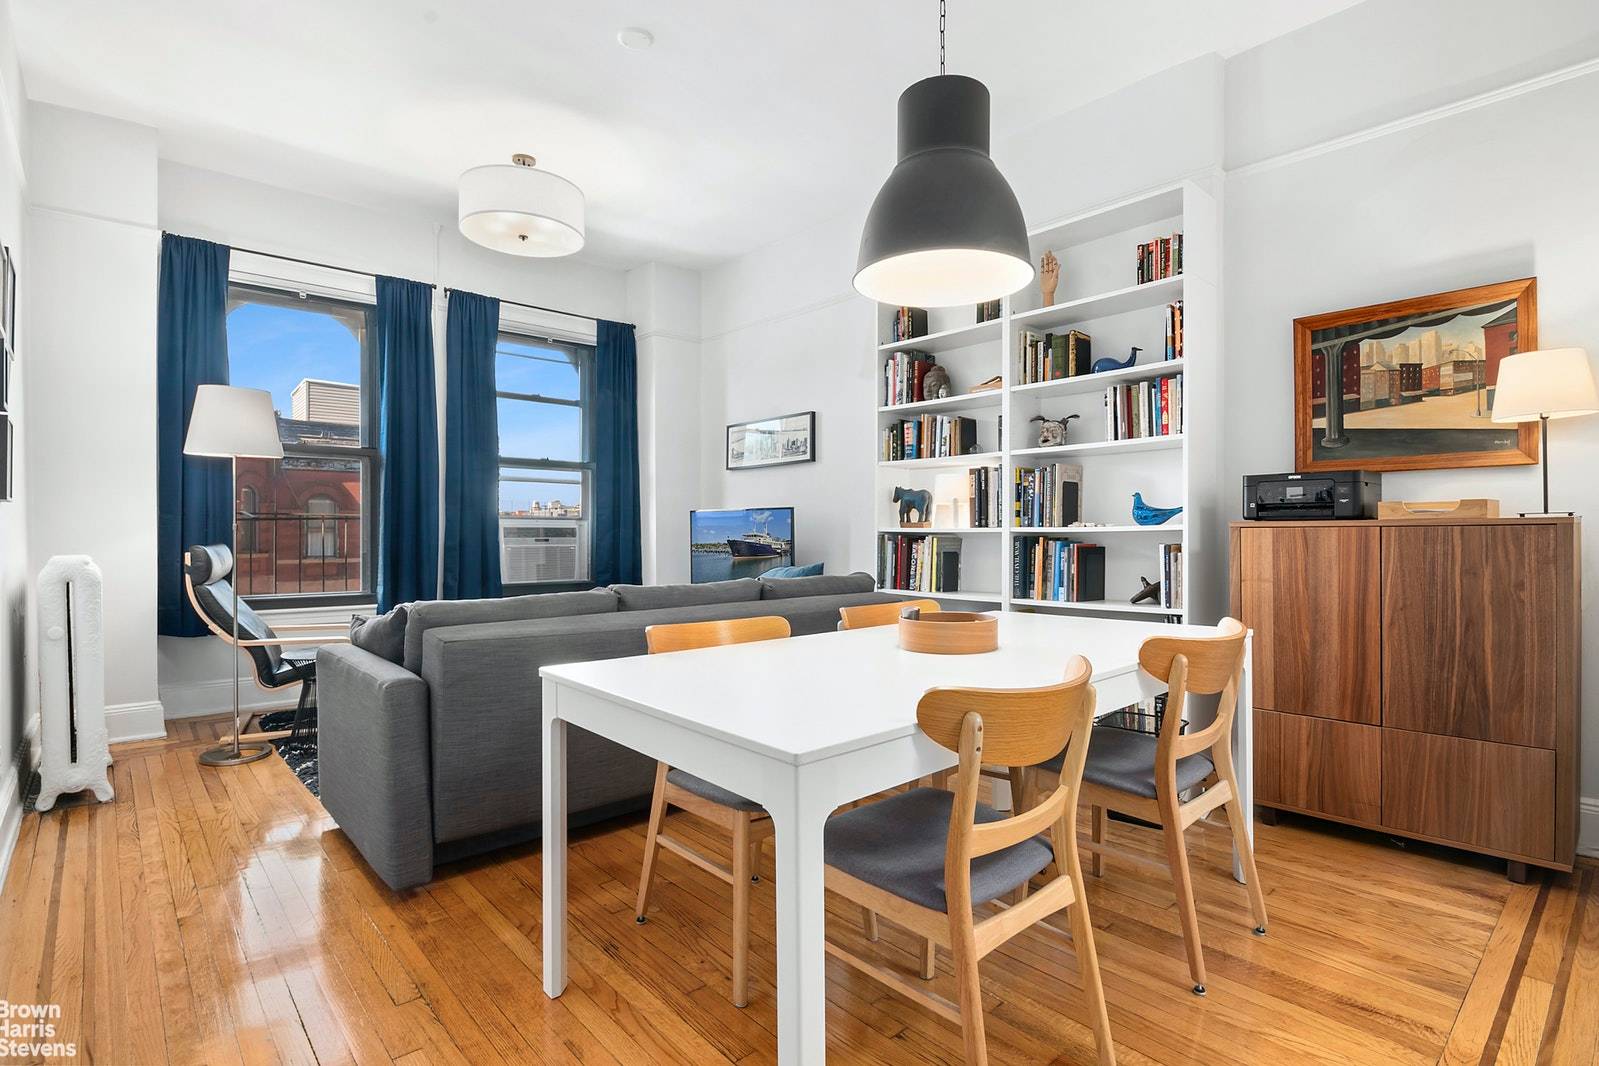 Located in a lovely pre war building, this Sun drenched convertible 1 bedroom apartment features hardwood floors throughout, high ceilings and X large windows.